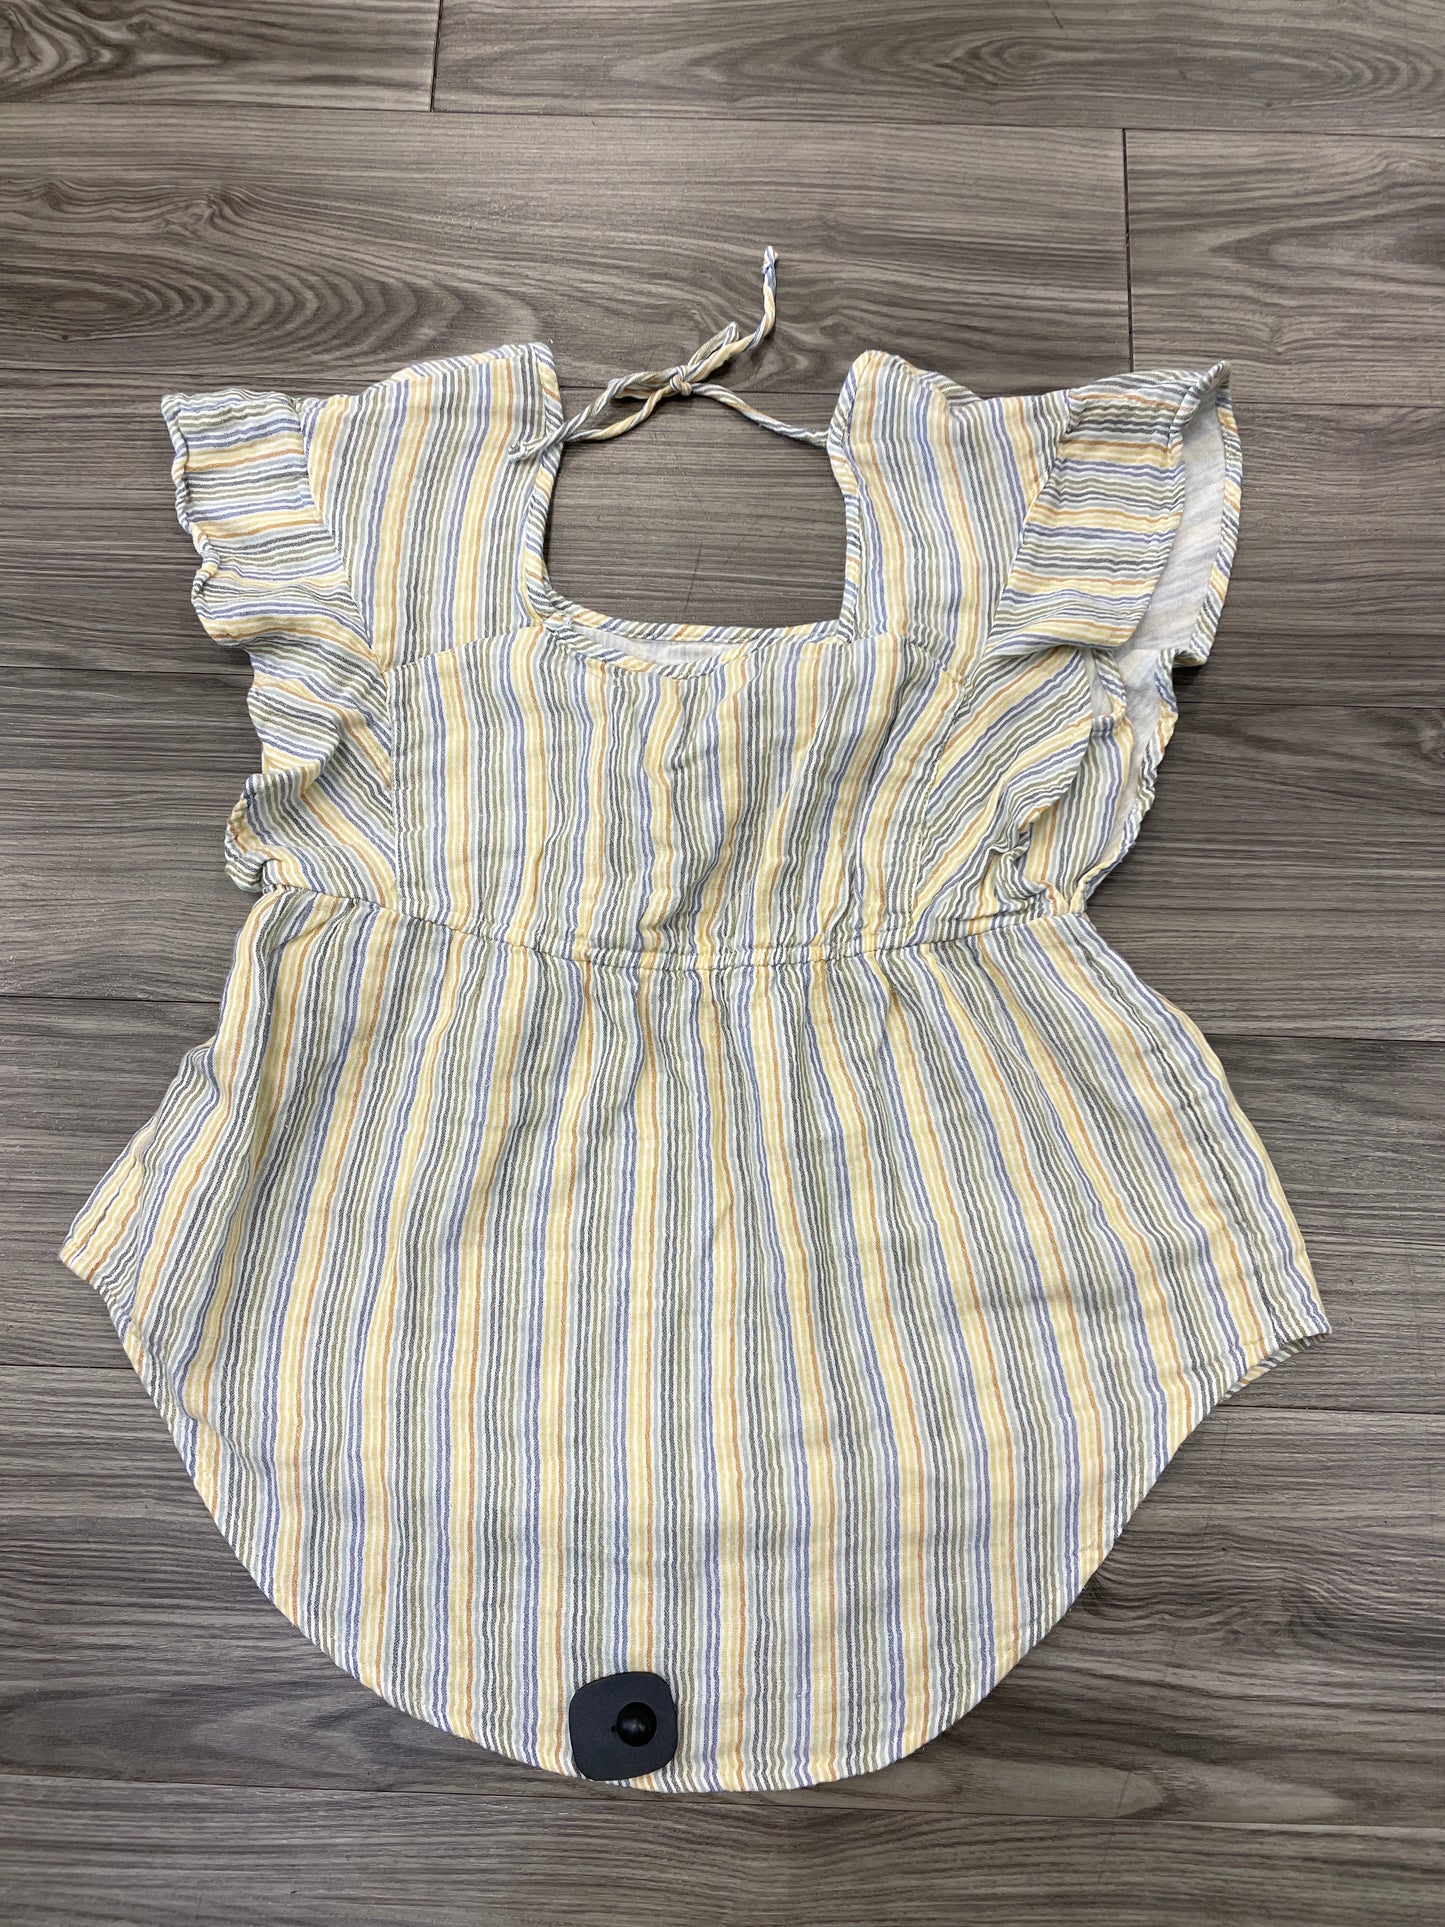 Striped Pattern Top Short Sleeve Sonoma, Size S